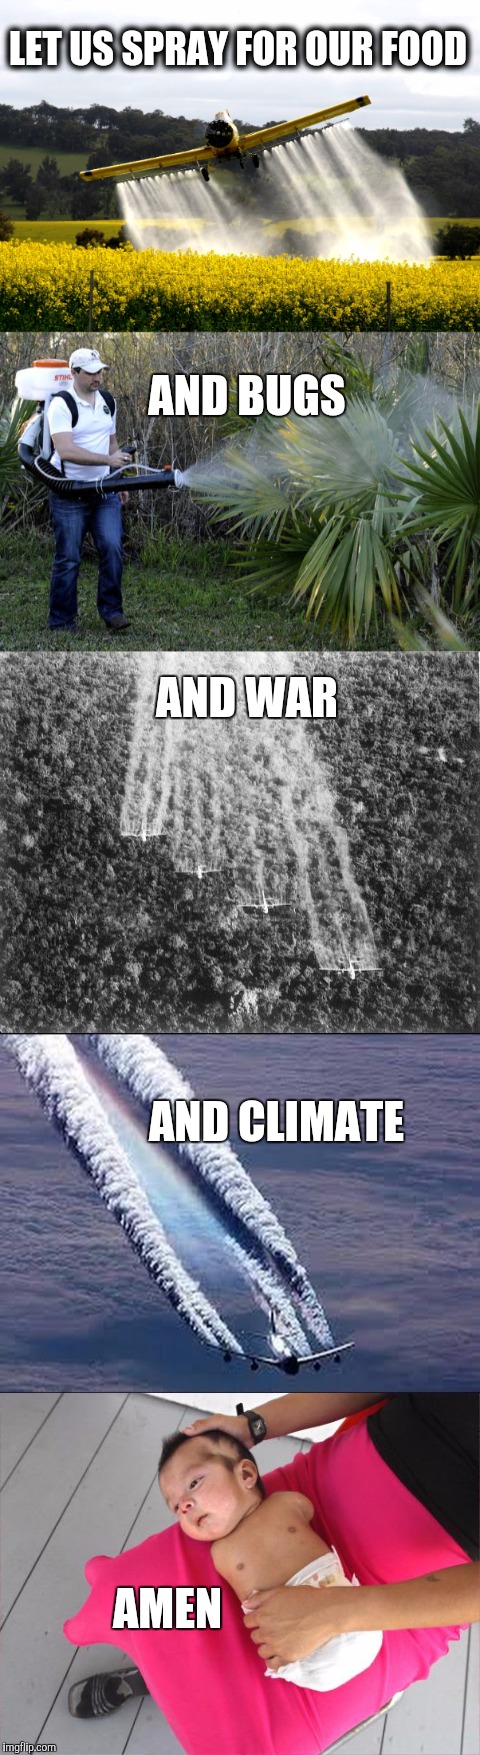 Got a problem.?  Just Spray it away. | LET US SPRAY FOR OUR FOOD; AND BUGS; AND WAR; AND CLIMATE; AMEN | image tagged in climate change,war,global warming,america,chemicals,spray | made w/ Imgflip meme maker